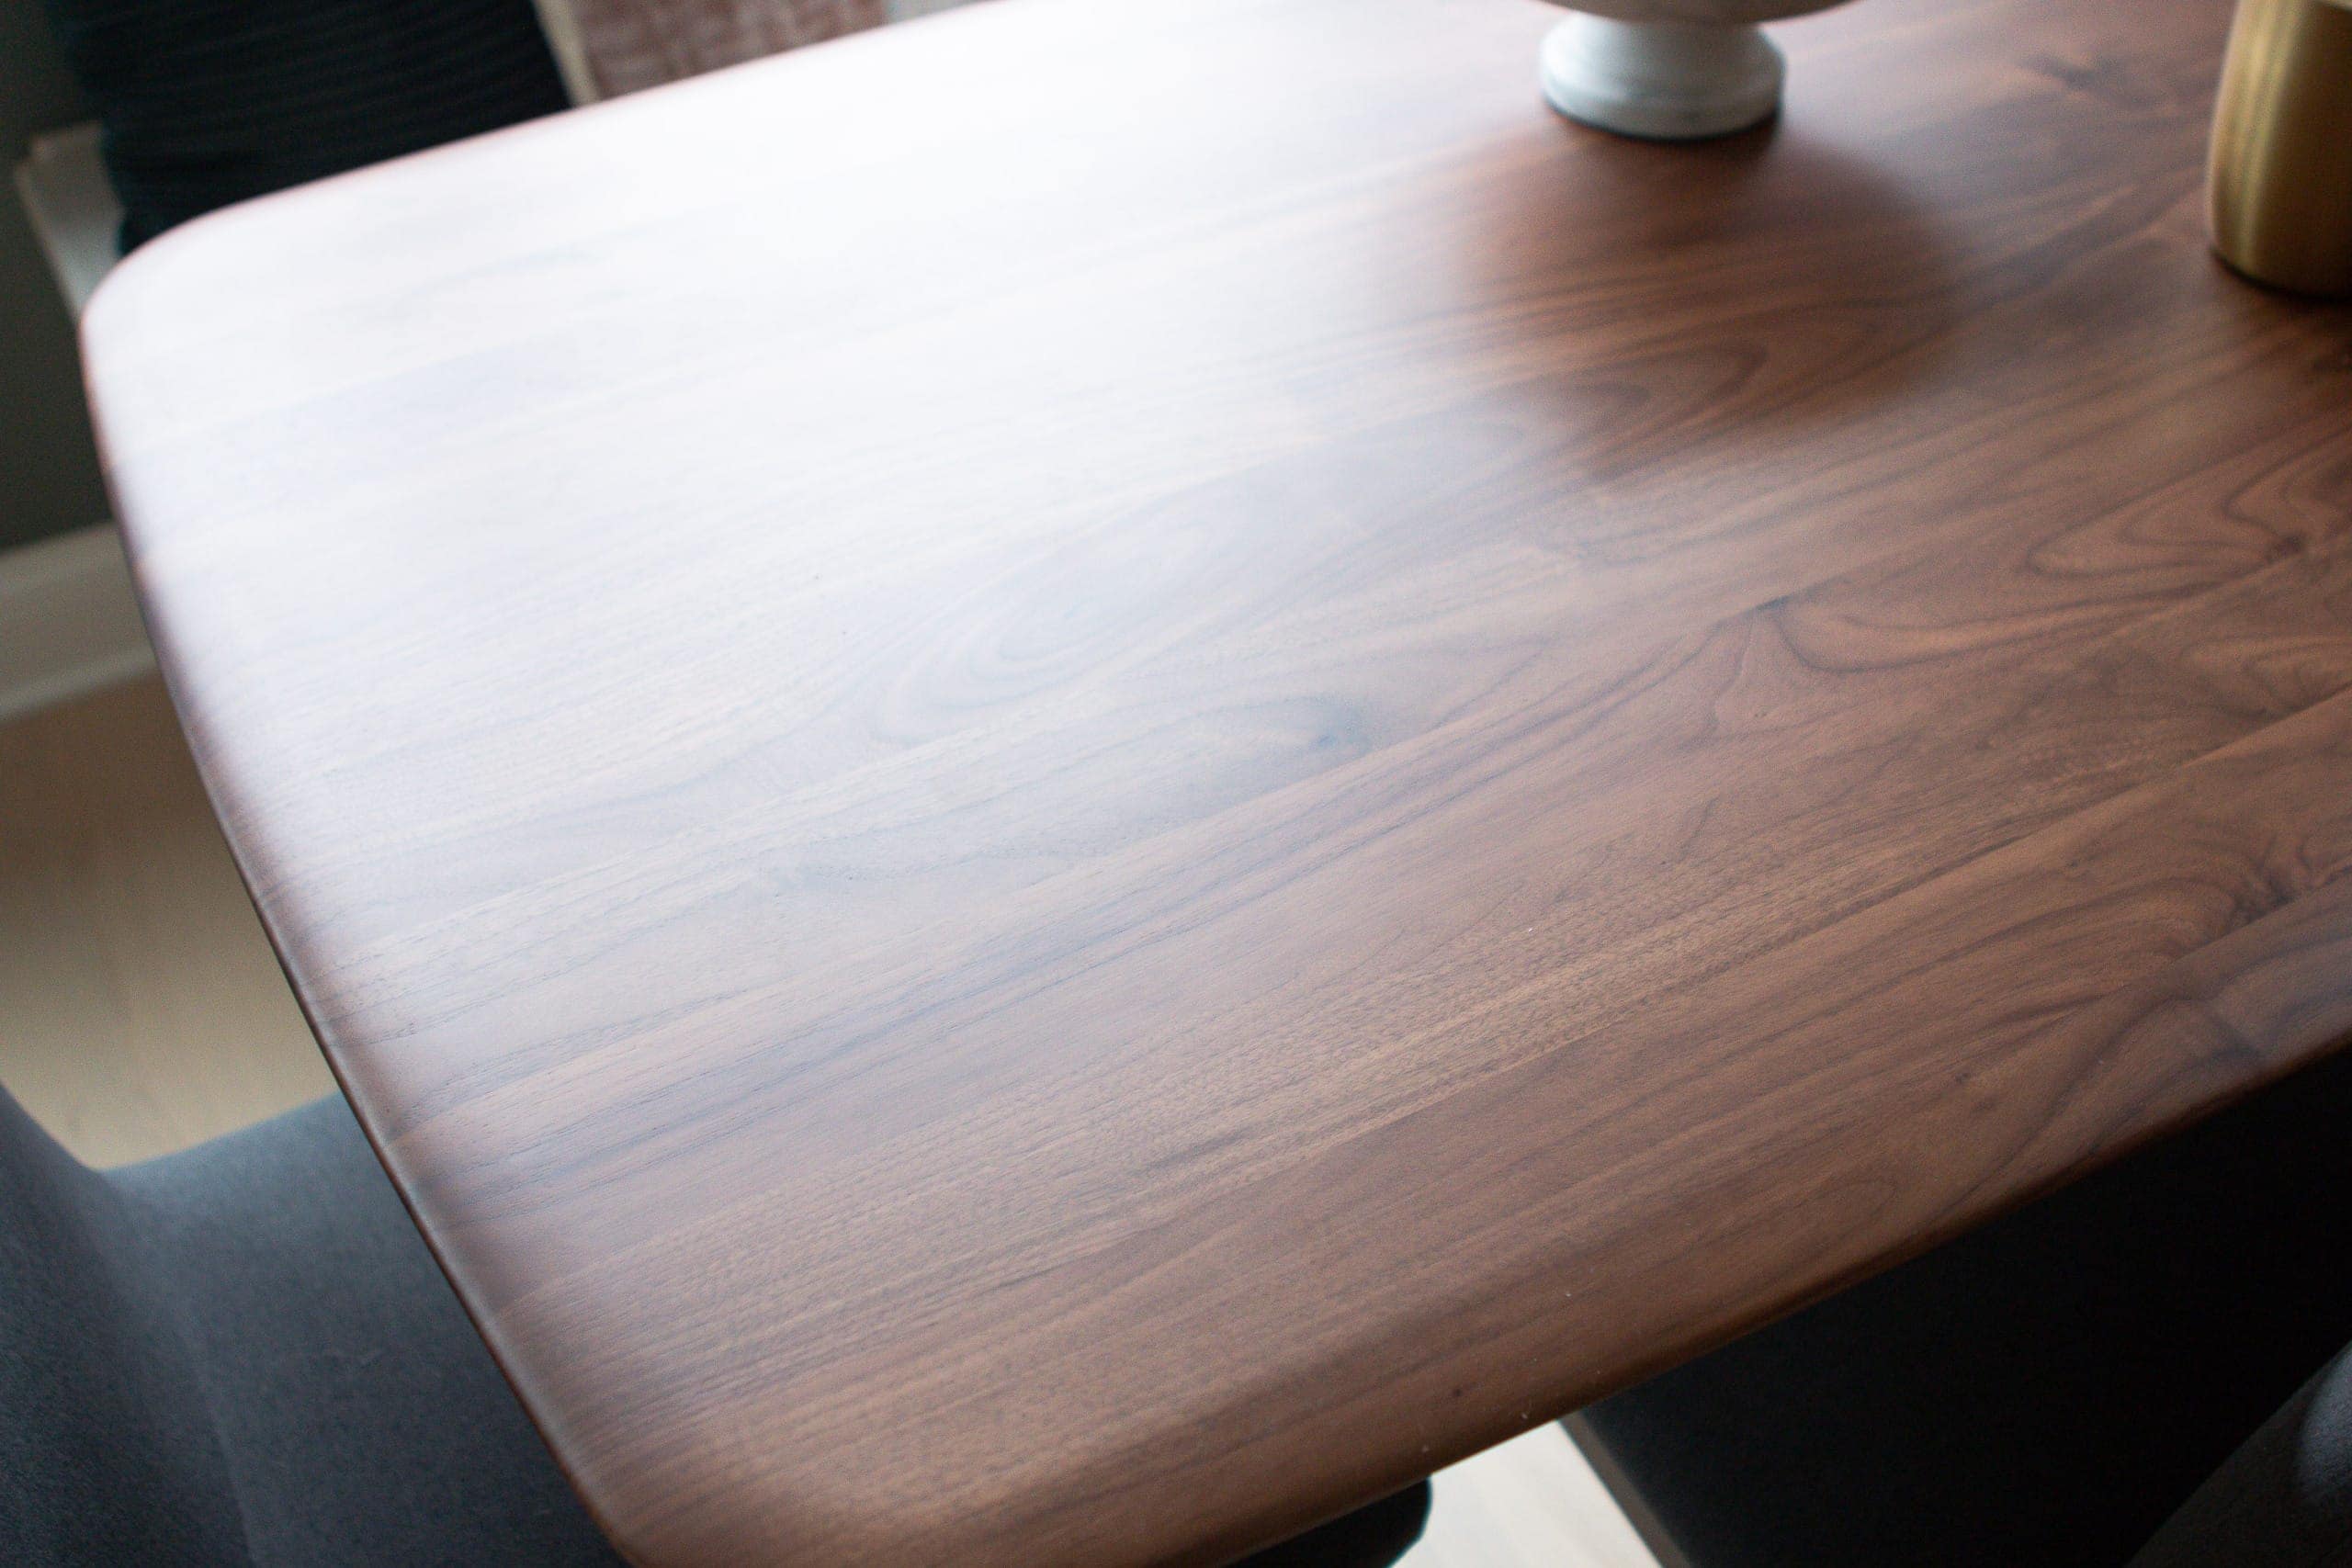 Curved edges on the Castlery wood dining table